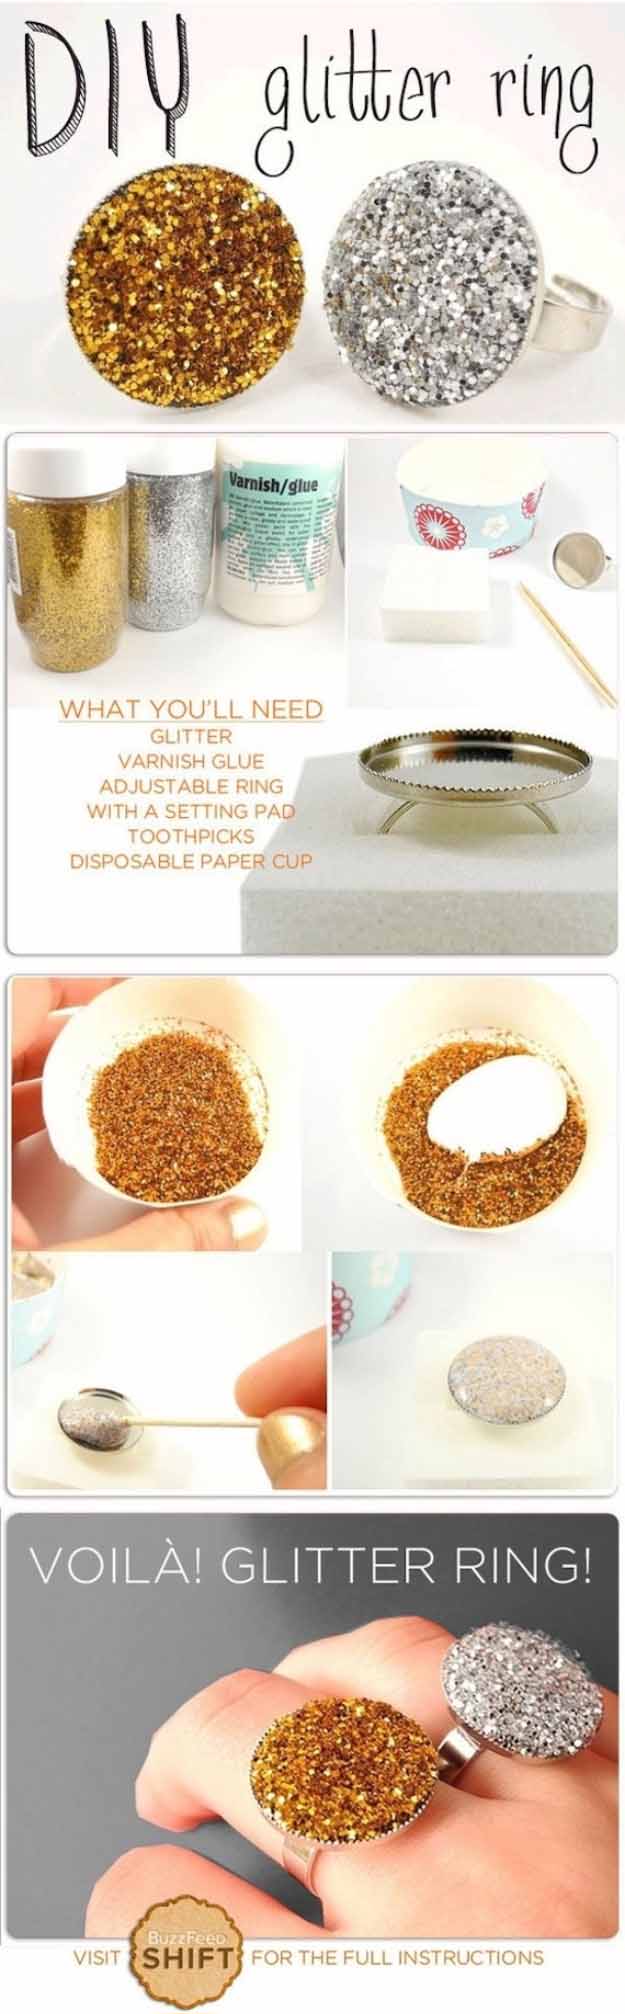 Cool Crafts You Can Make for Less than 5 Dollars | Cheap DIY Projects Ideas for Teens, Tweens, Kids and Adults | DIY Glitter Rings #teencrafts #cheapcrafts #crafts/